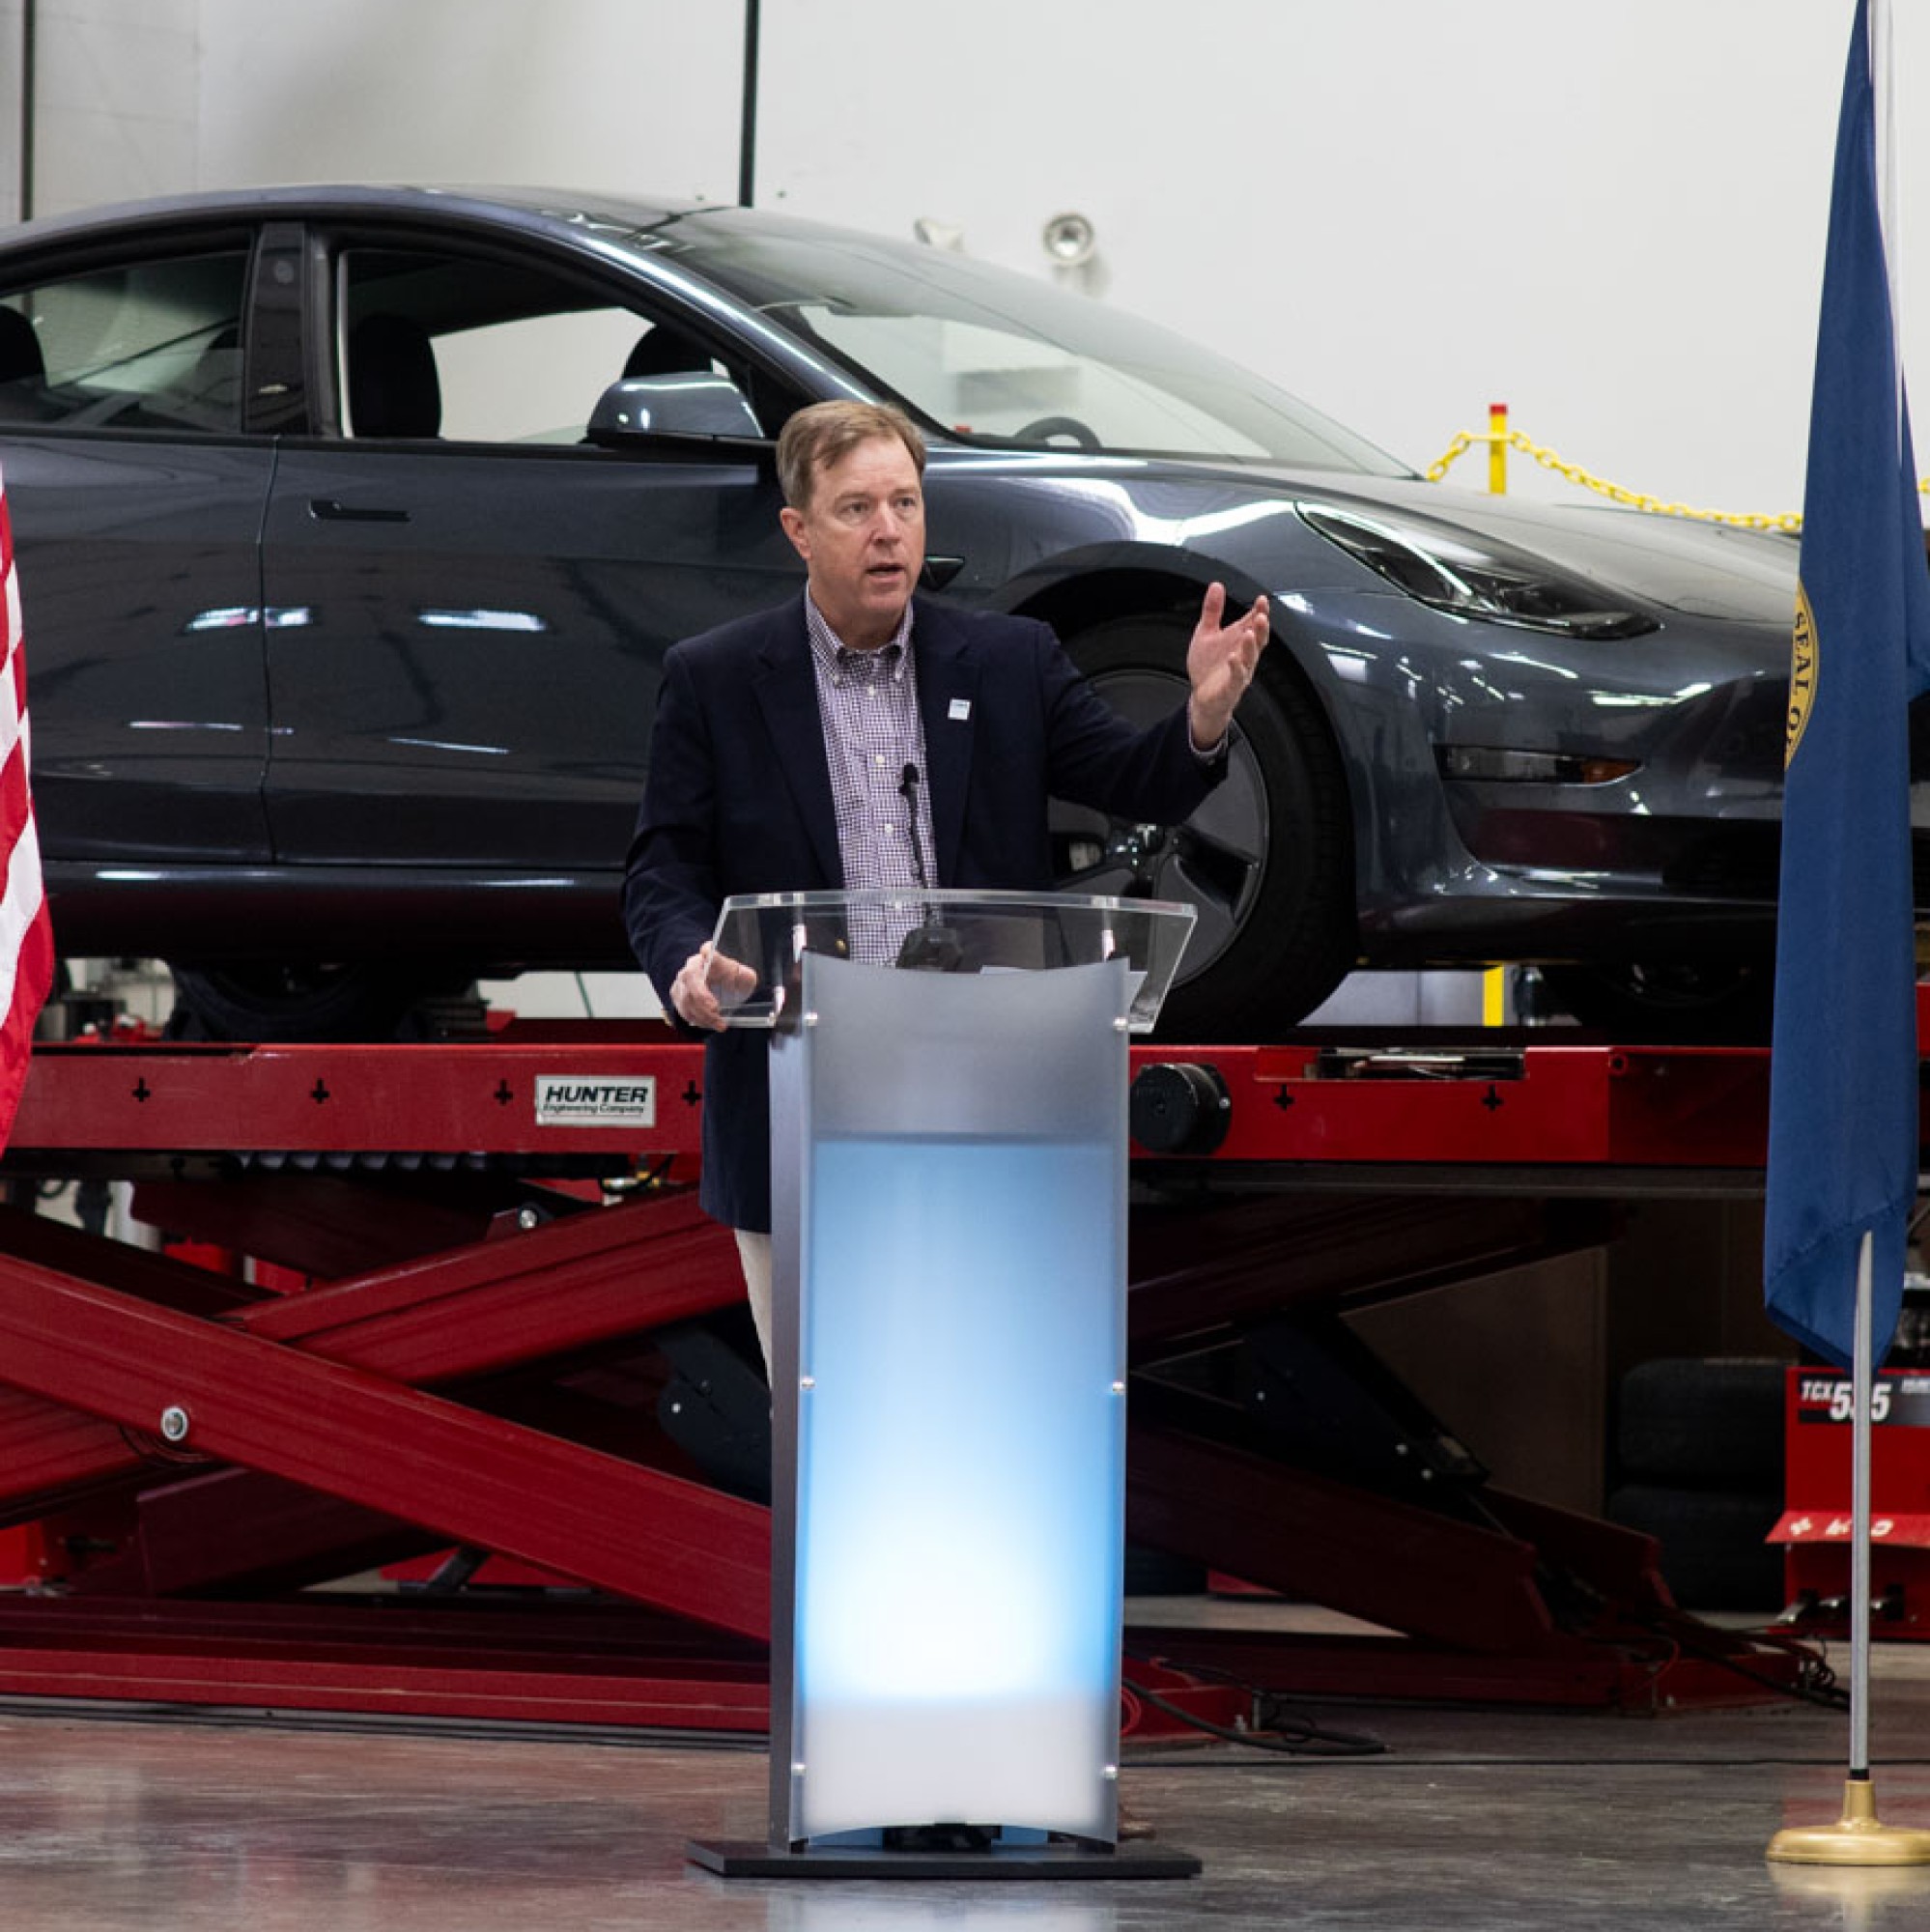 The College president speaks from a podium in front of a newly delivered Tesla electric vehicle.